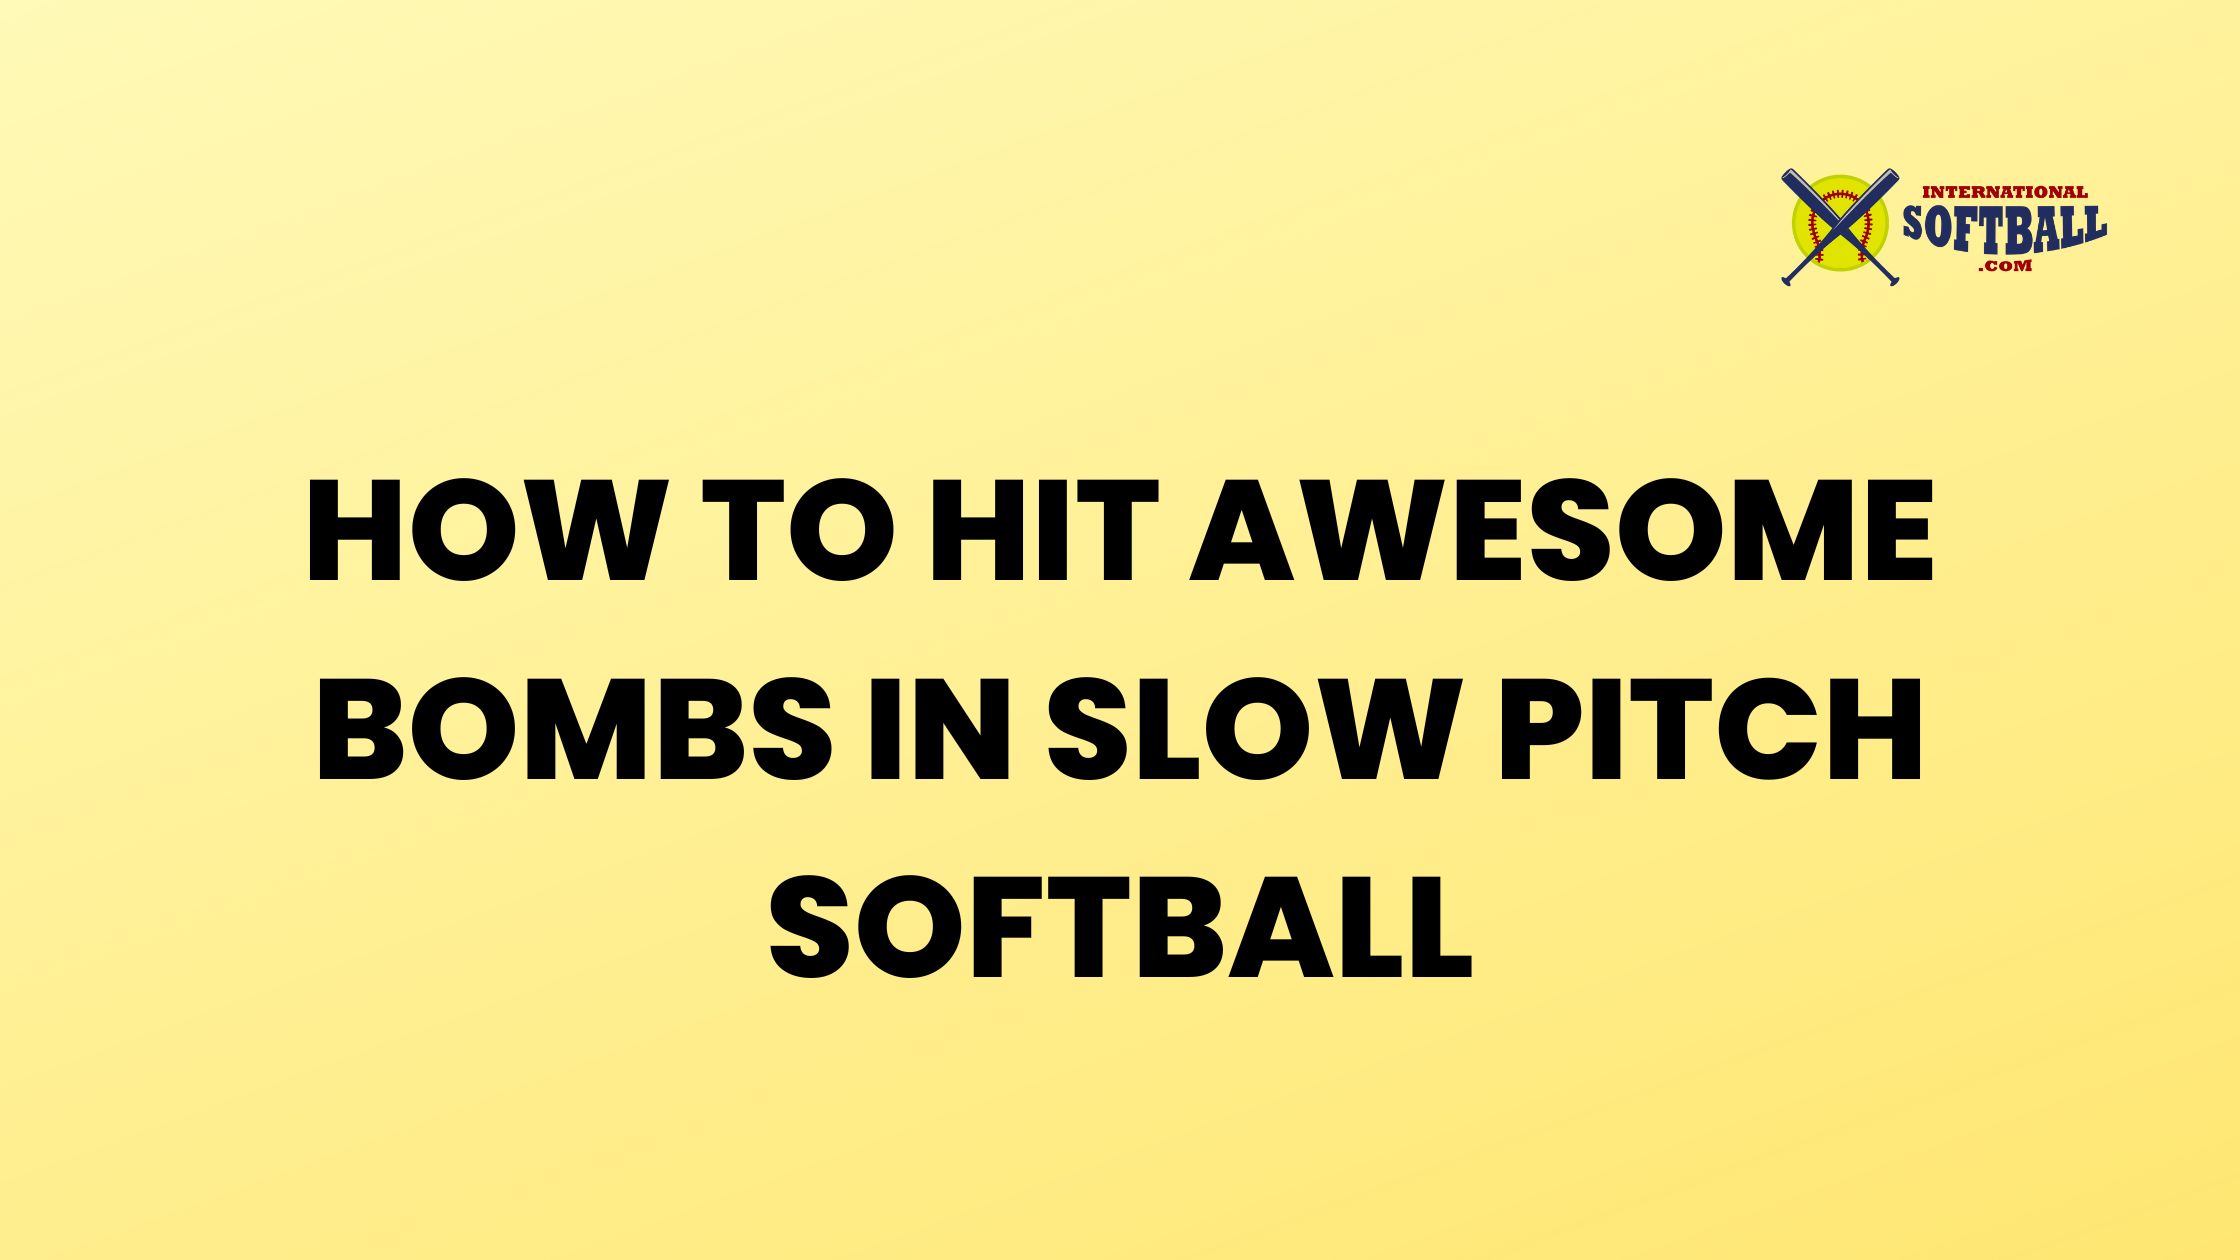 HOW TO HIT AWESOME BOMBS IN SLOW PITCH SOFTBALL